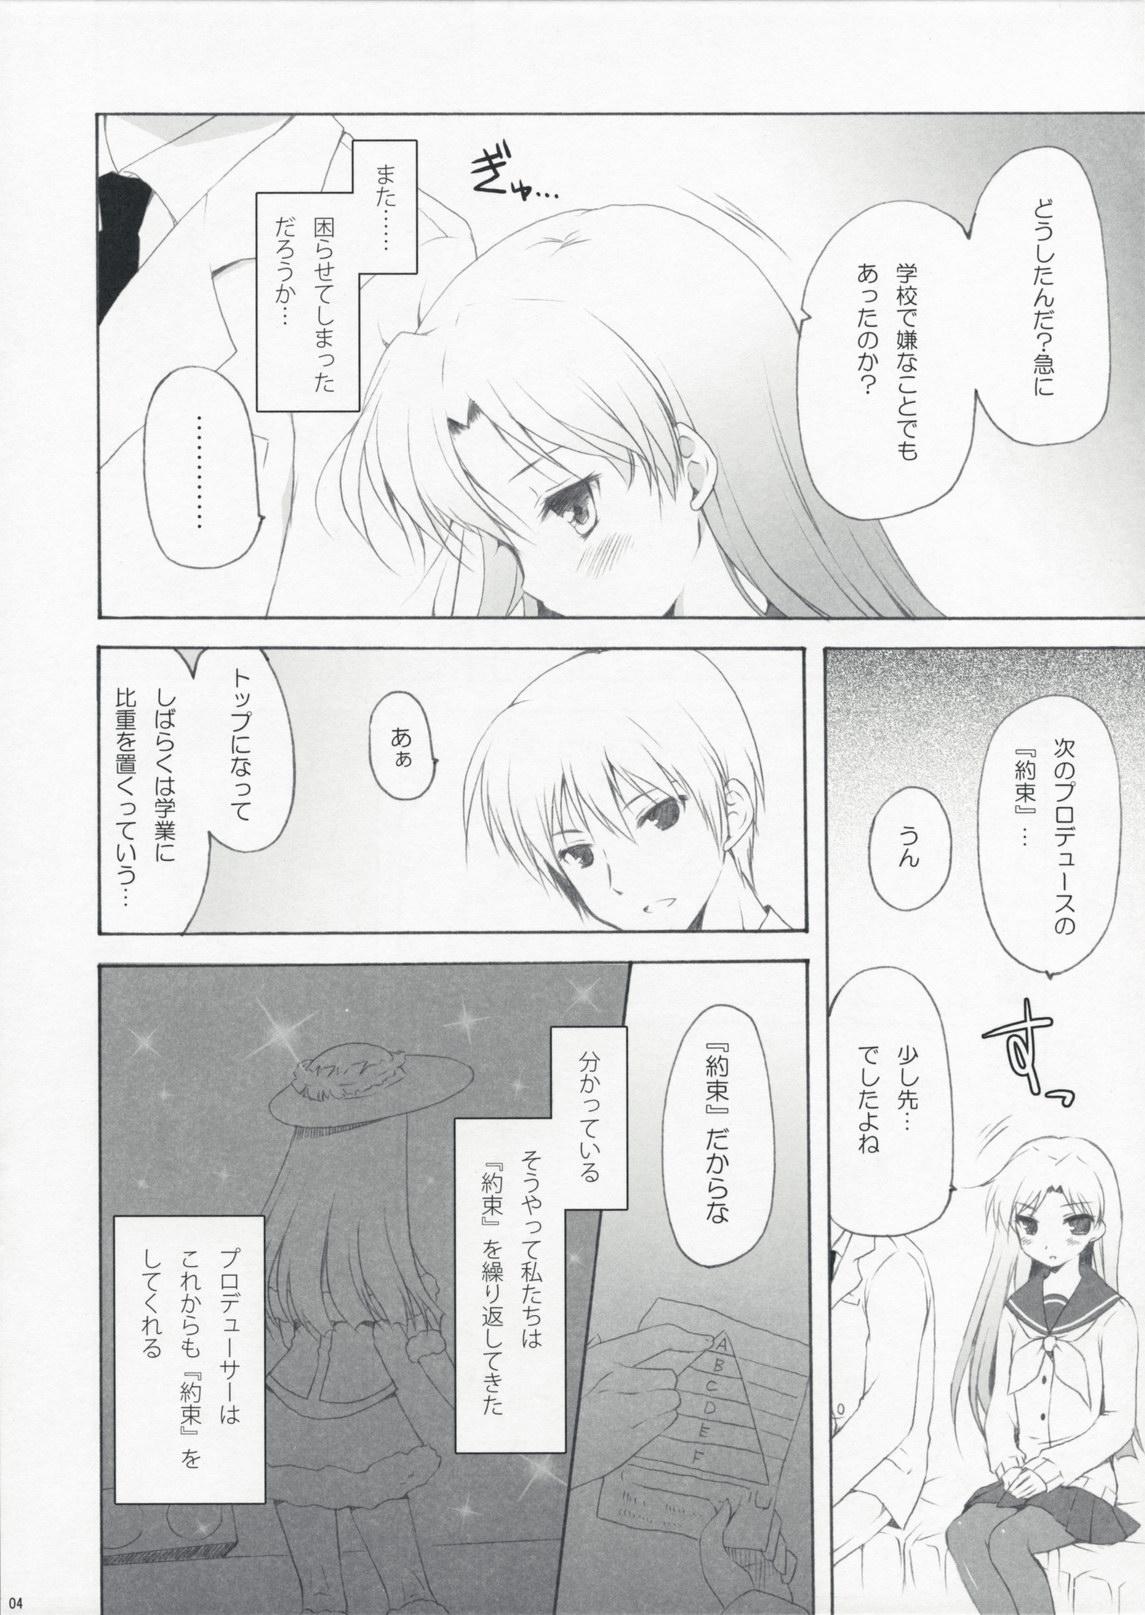 Bigbutt miss you - The idolmaster Indo - Page 3